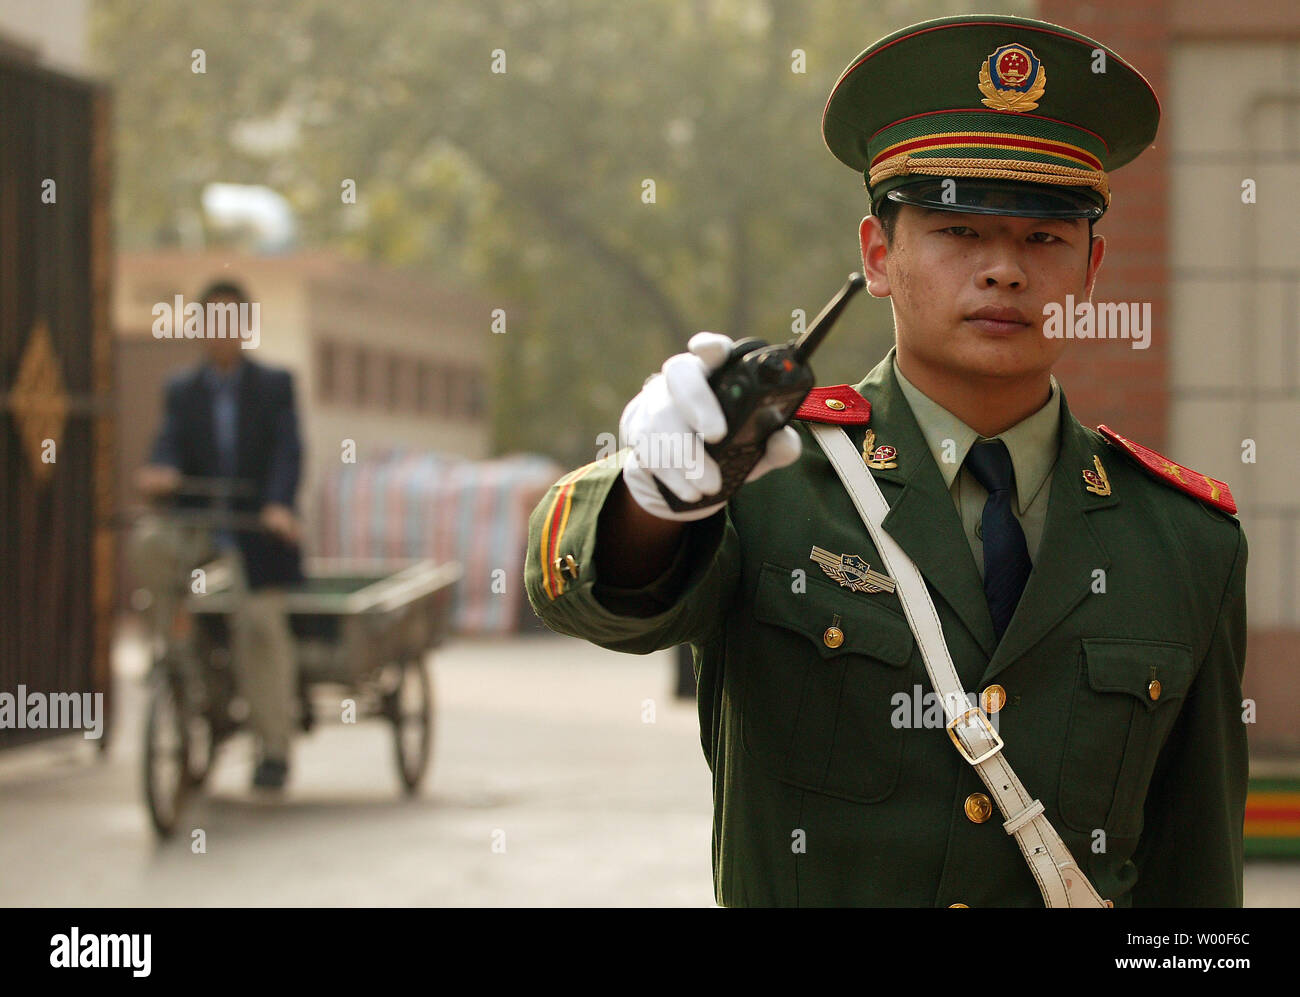 A Chinese soldier guarding the North Korean embassy in Beijing motions for people to move away from the compound on October 10, 2006.  China said on Monday it firmly opposed North Korea's nuclear test, denouncing it as 'brazen' in unusually strong language, and demanded Pyongyang stop any action that could worsen the situation. (UPI Photo/Stephen Shaver) Stock Photo